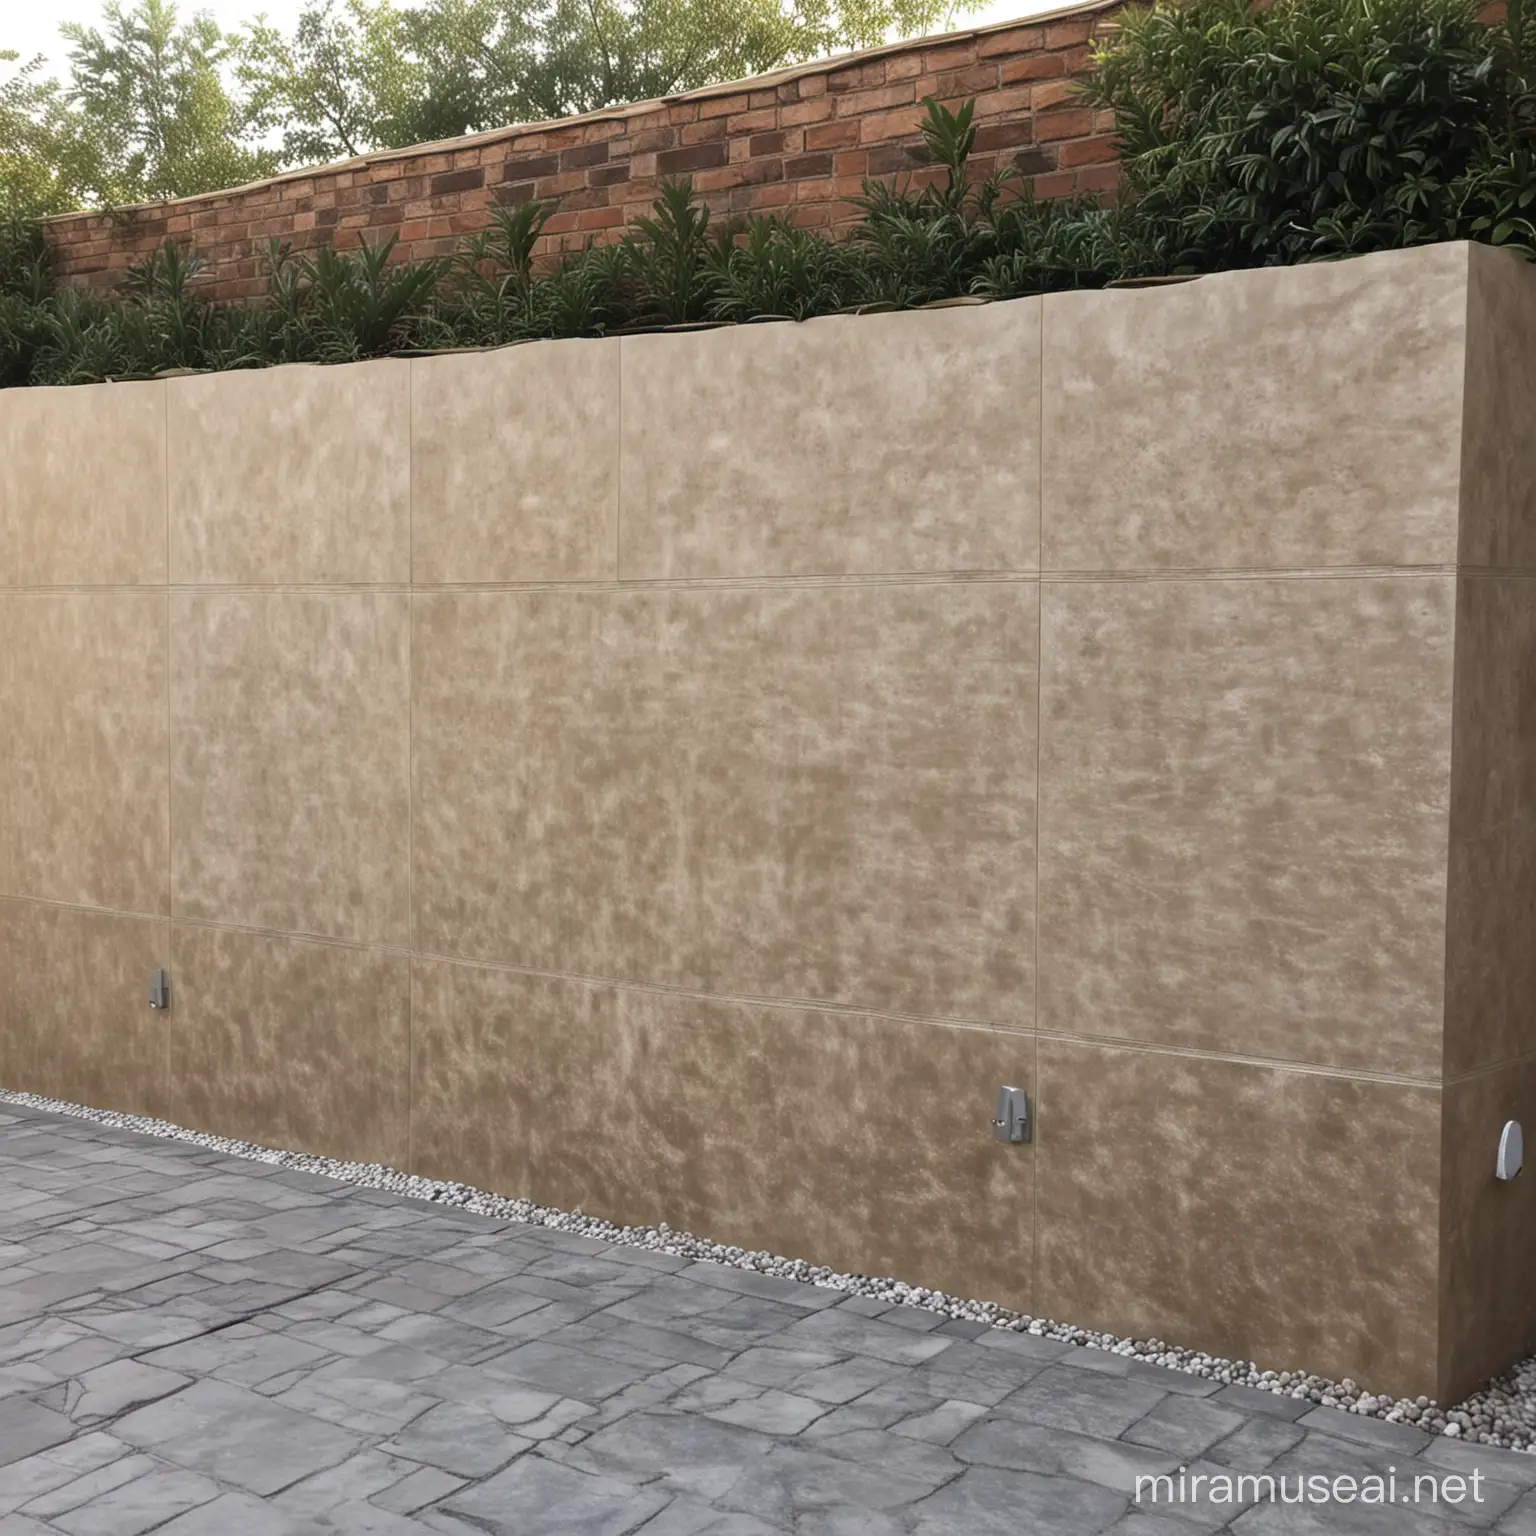 outside wall for massage spa business
